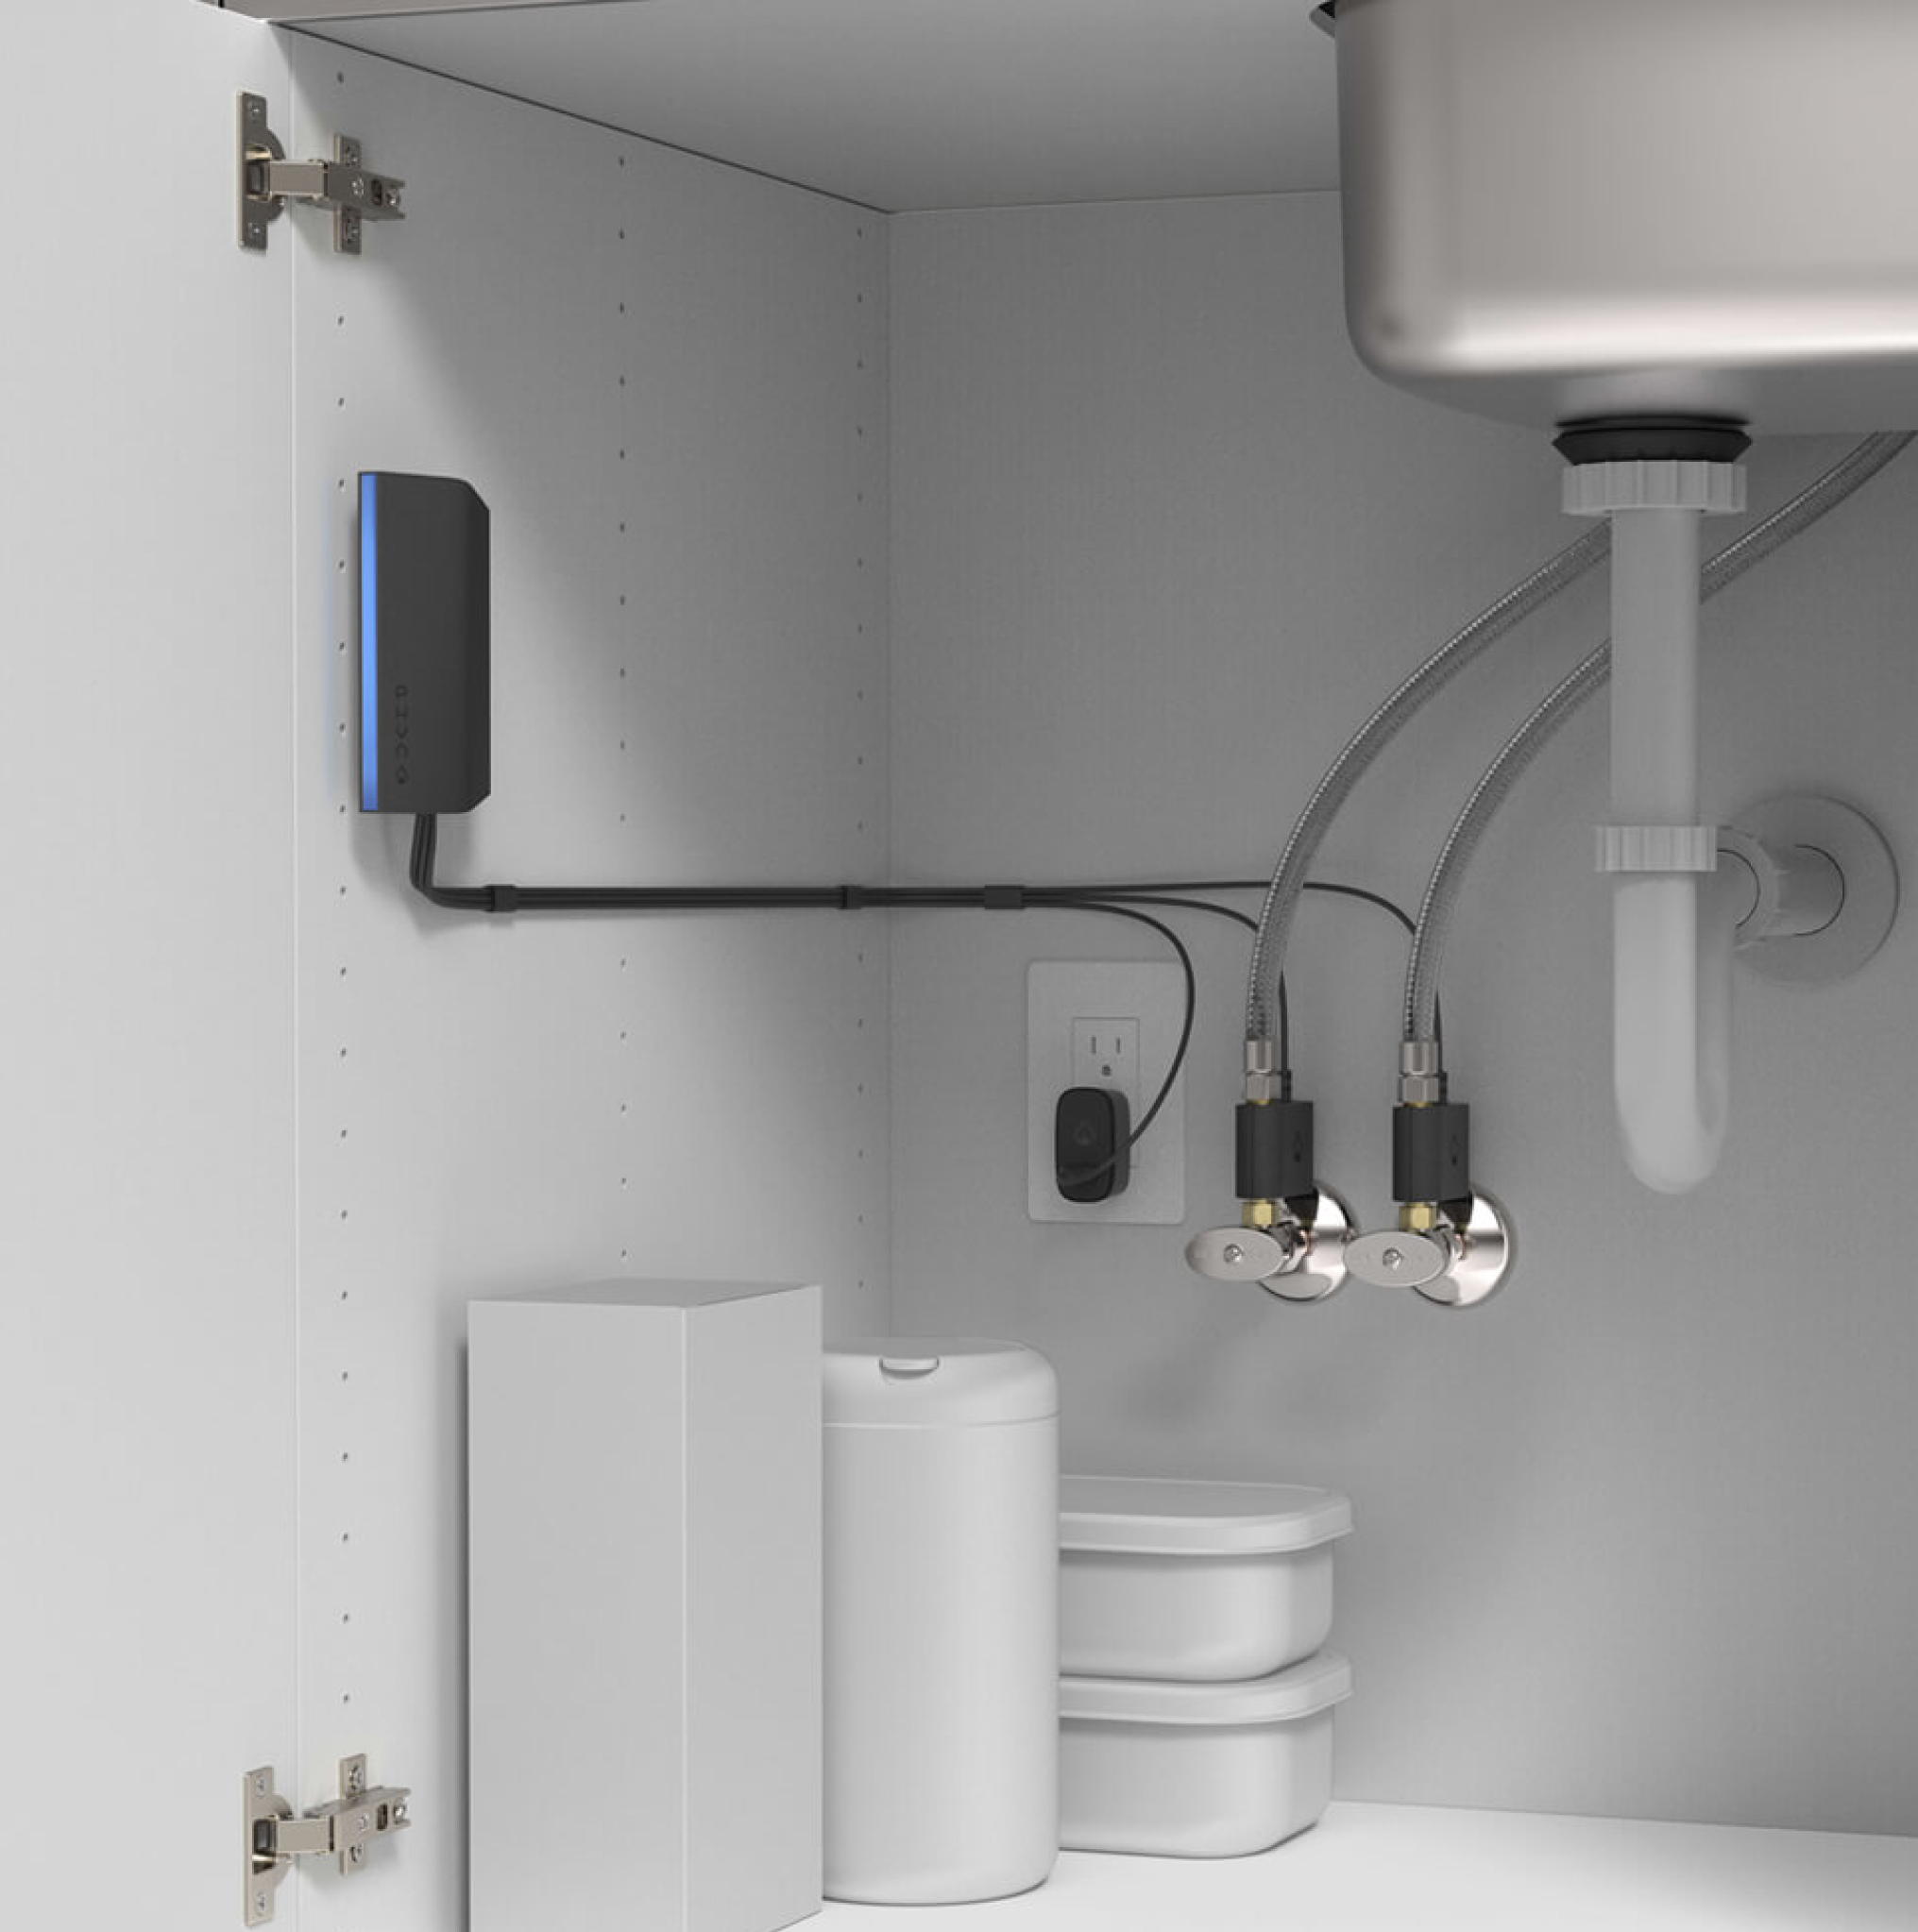 The Phyn Smart Water Assistant installed under the sink. 